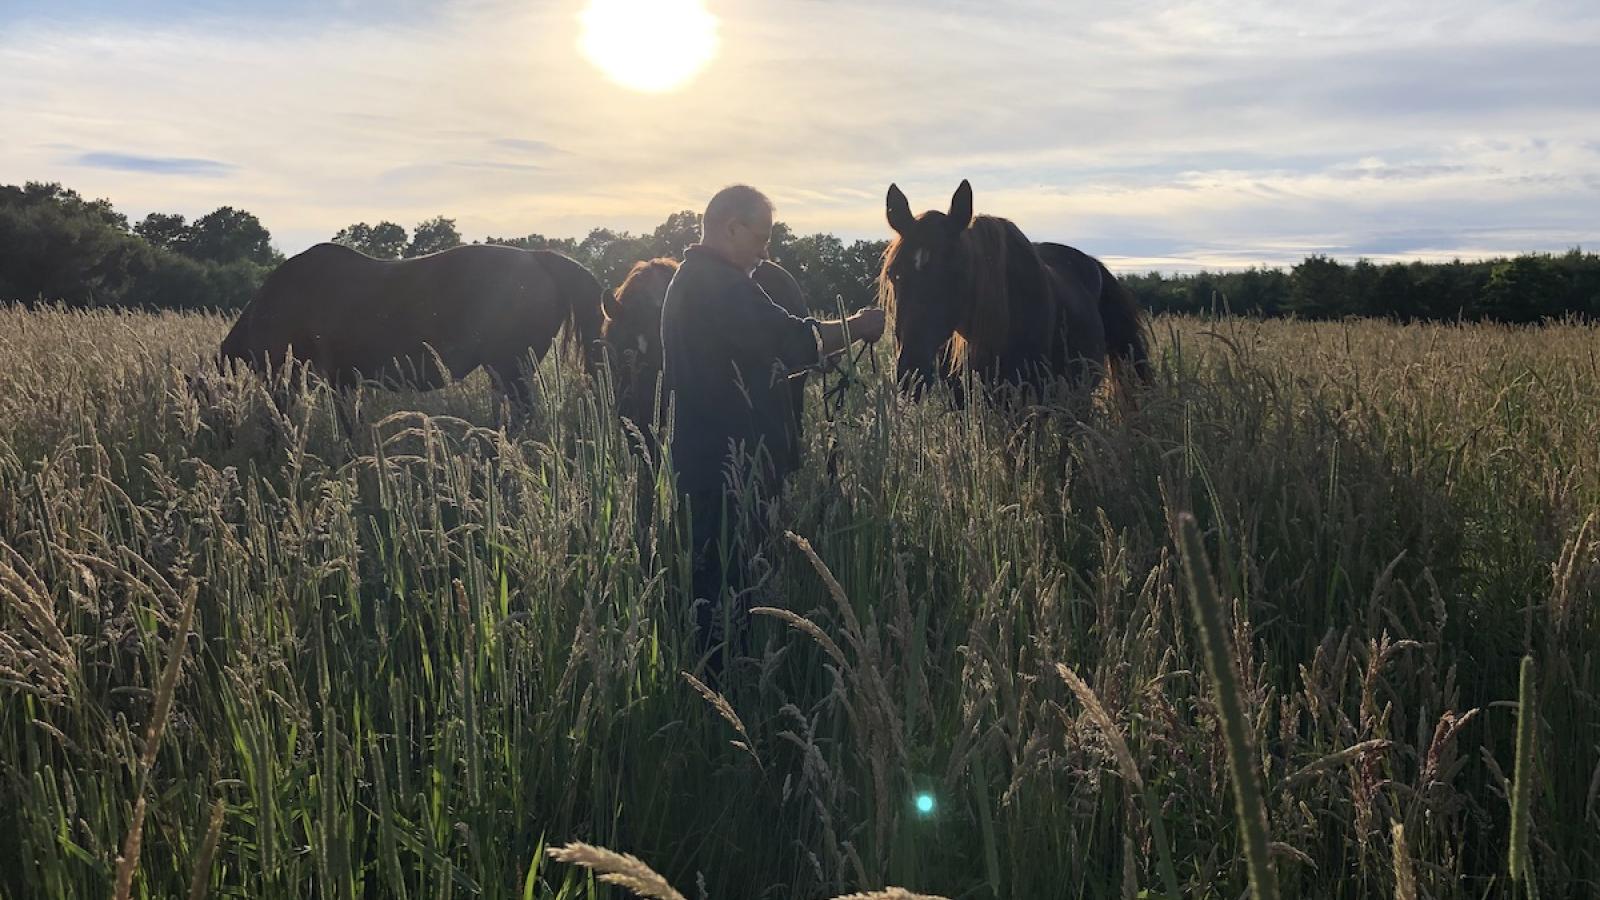 Molly Sowash's Dad and three horses on the summer solstice getting ready for an annual solstice ride. The sun is shining brightly in the background and there are long grasses in the foreground. 